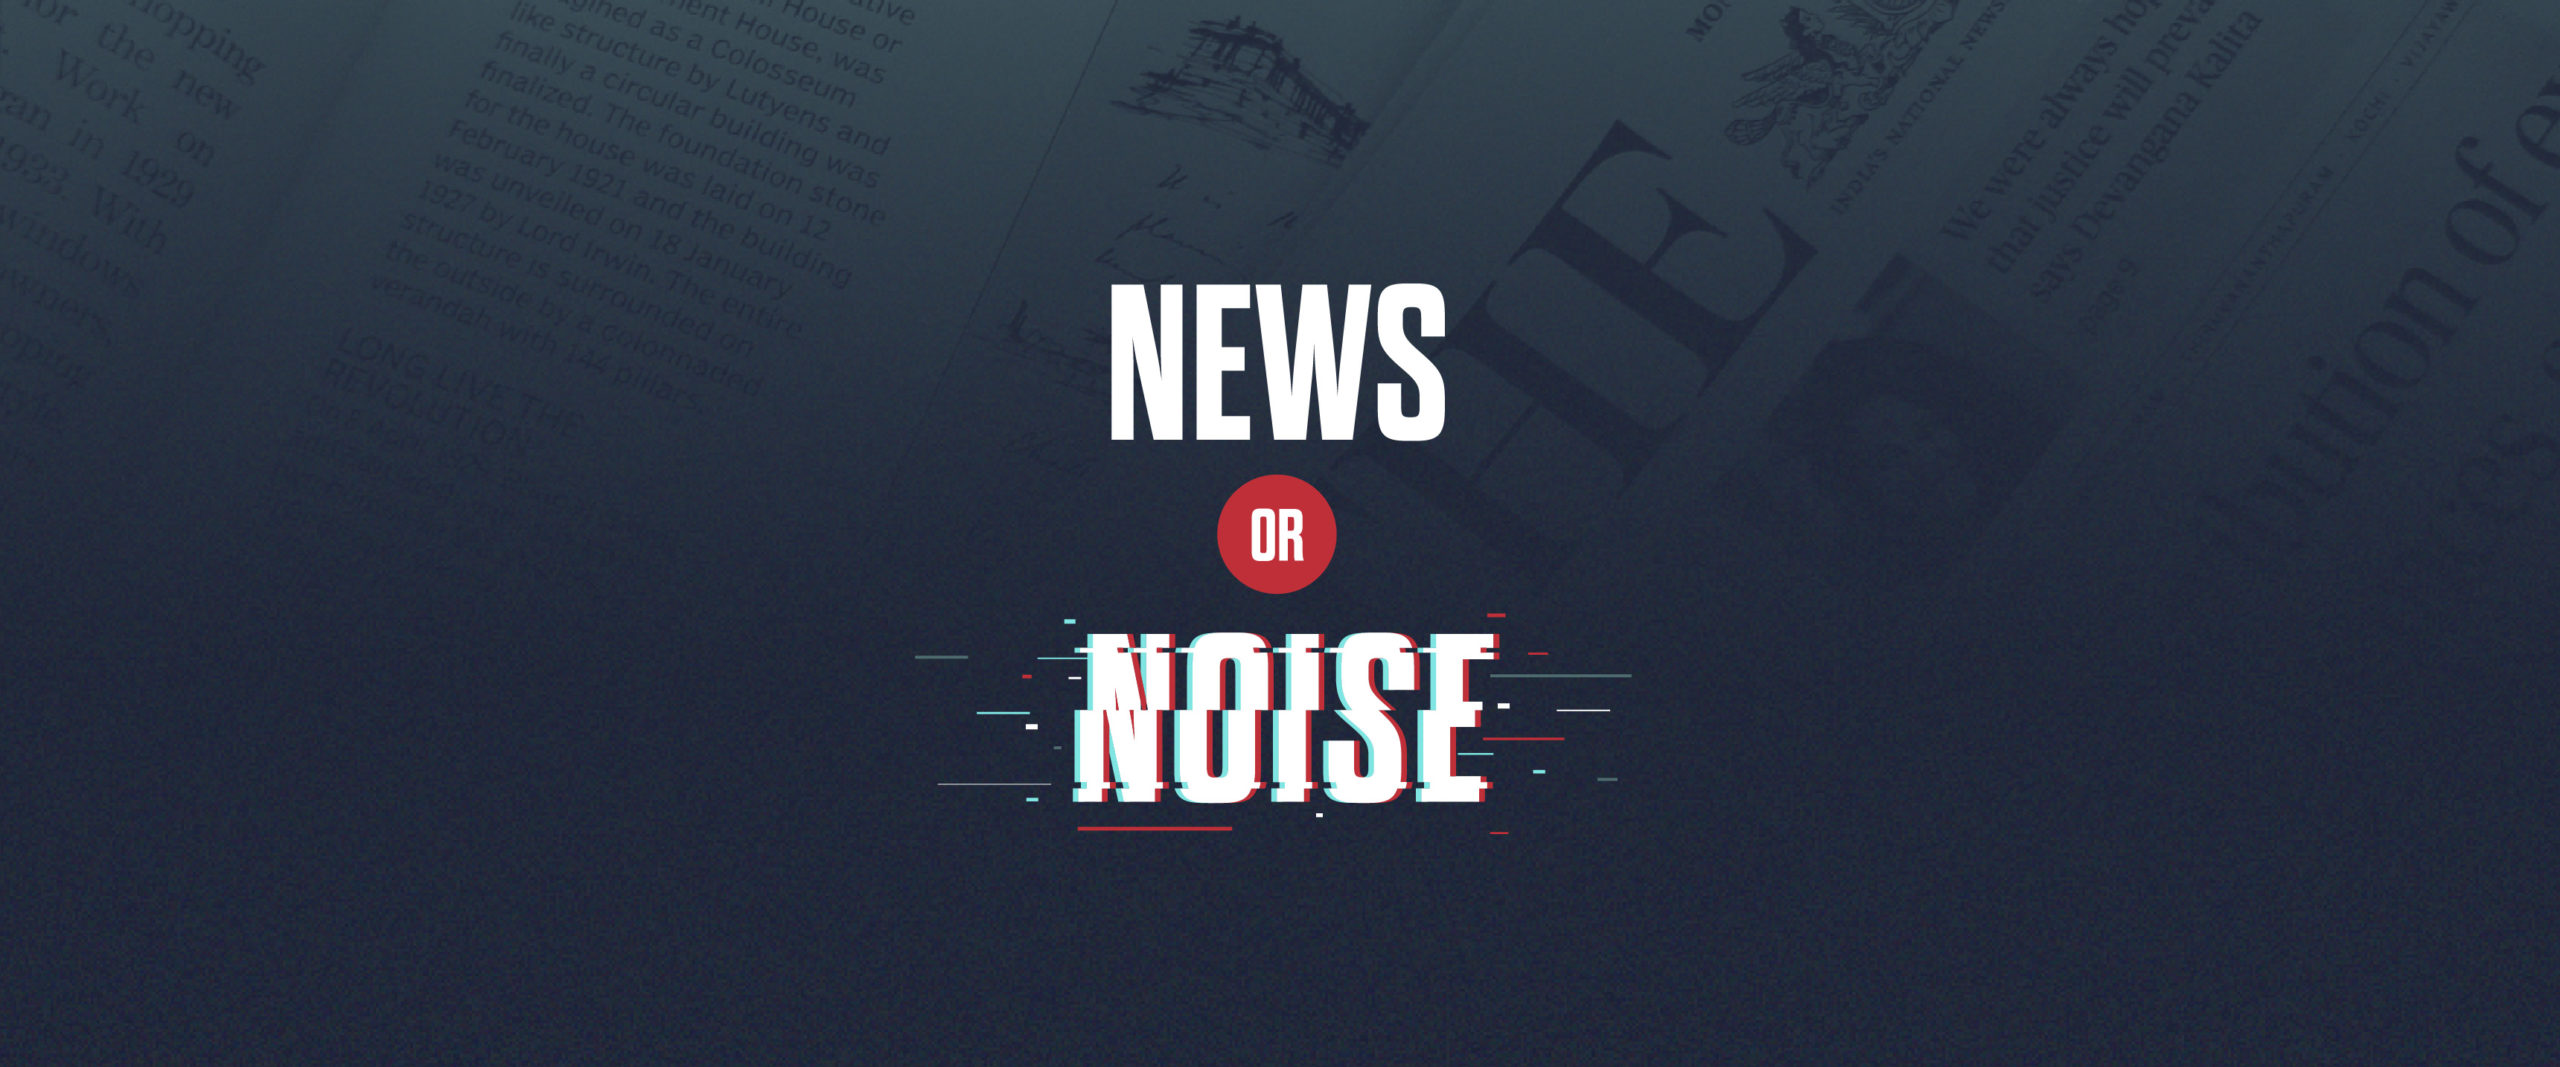 NEWS OR NOISE? 3 QUESTIONS TO DETERMINE NEWSWORTHY CONTENT